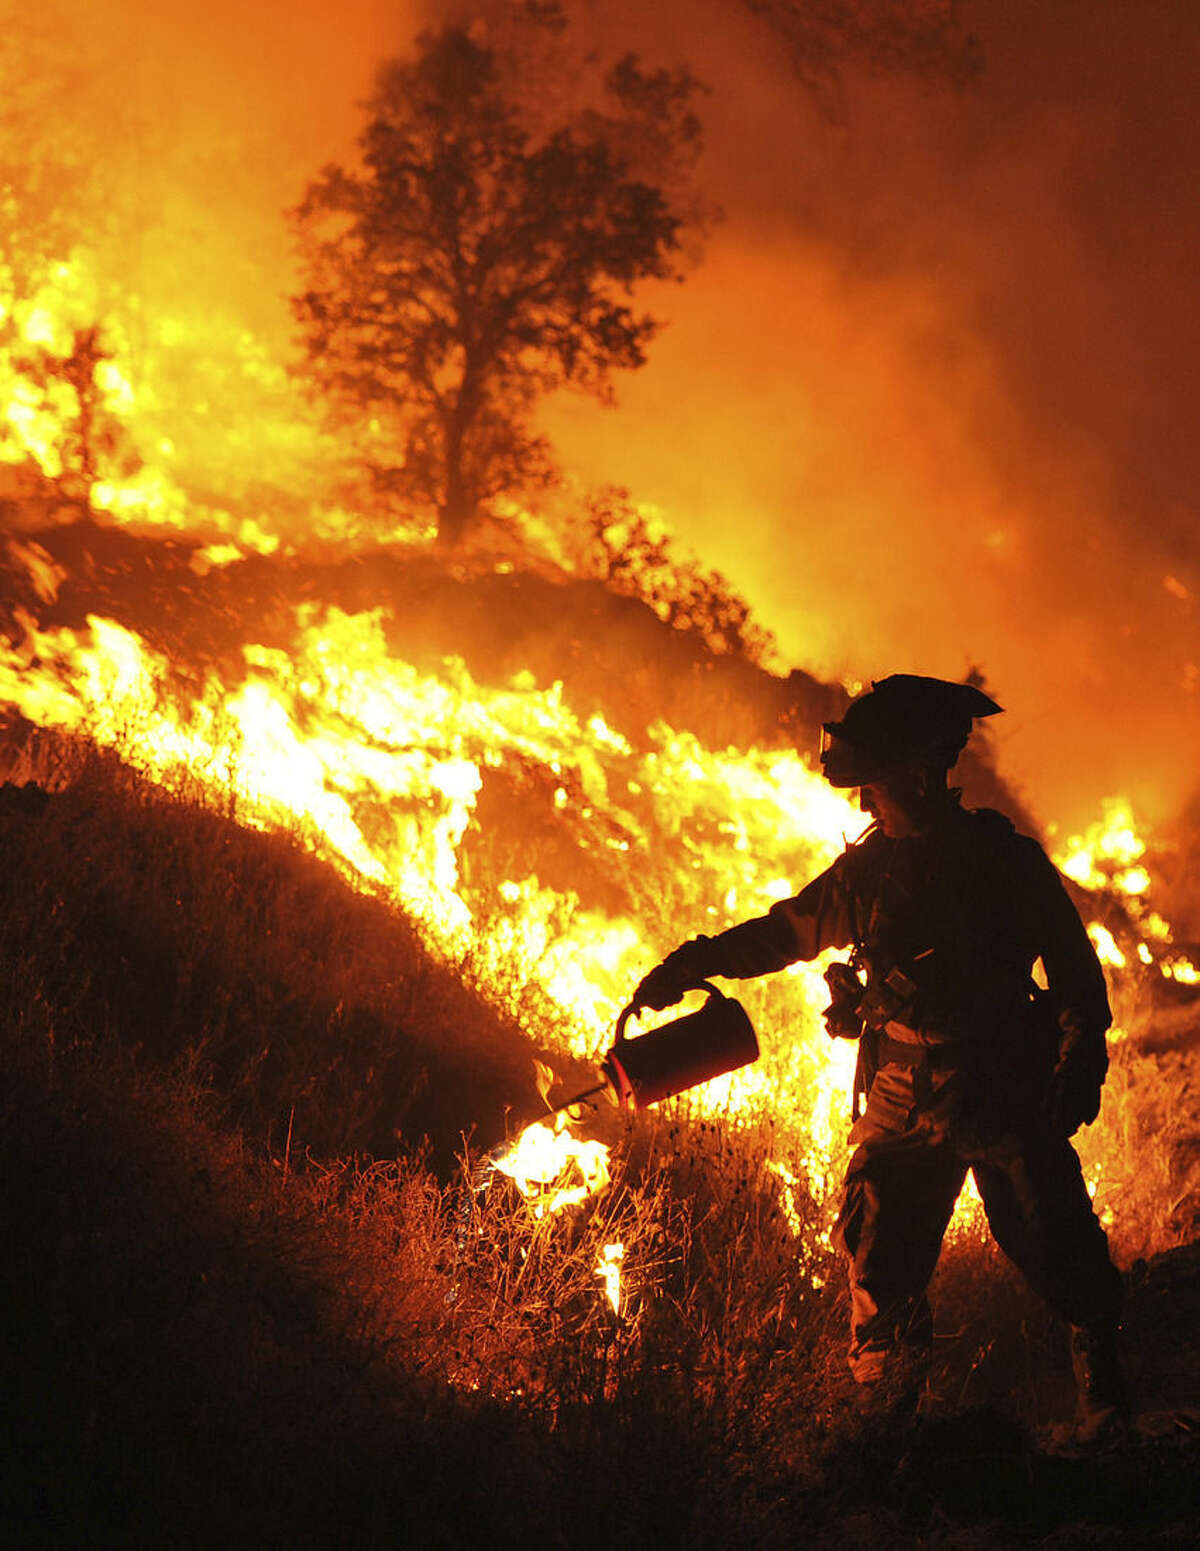 CalFire firefighter Bo Santiago lights a backfire as the Rocky Fire burns near Clearlake, Calif., on Monday, Aug. 3, 2015. The fire has charred more than 60,000 acres and destroyed at least 24 residences. (AP Photo/Josh Edelson)